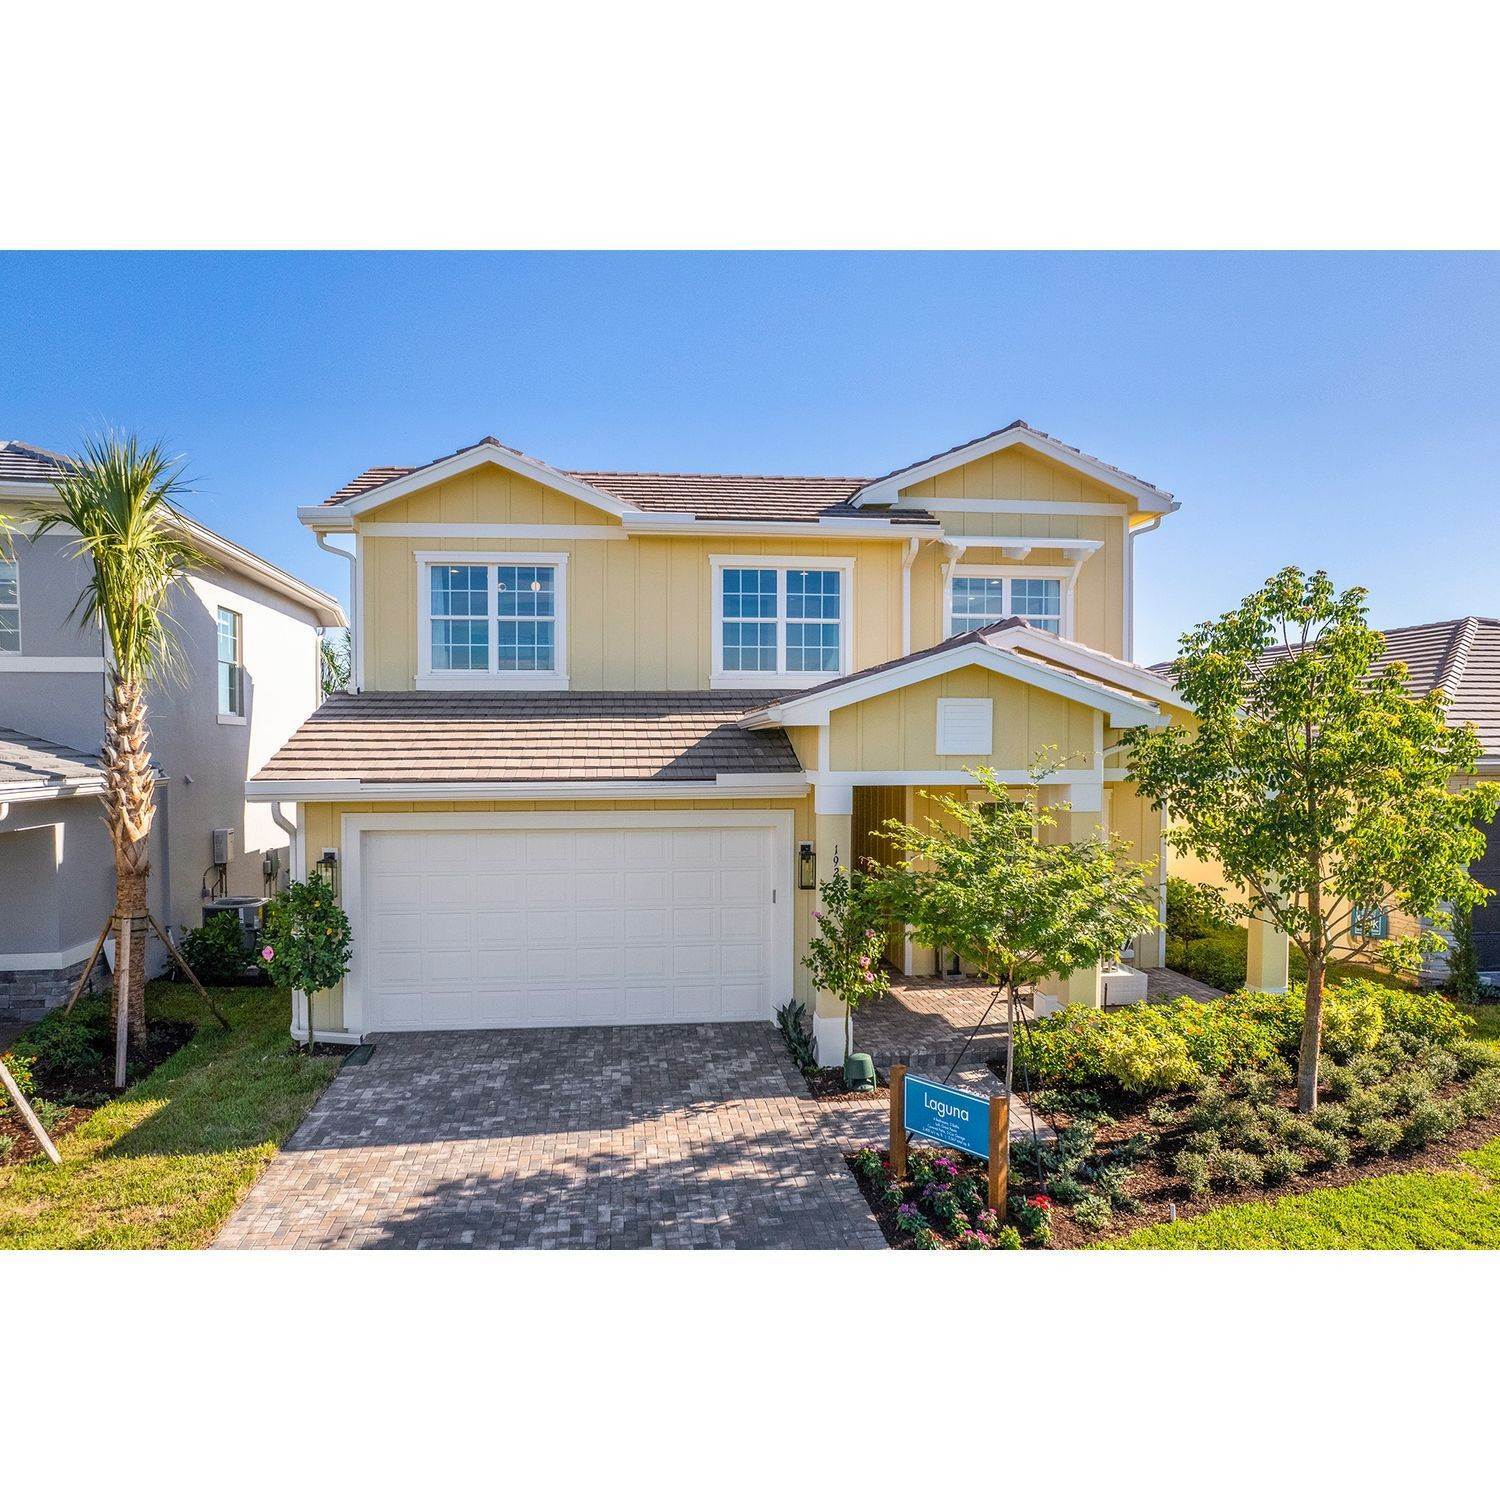 Single Family for Sale at Loxahatchee, FL 33470